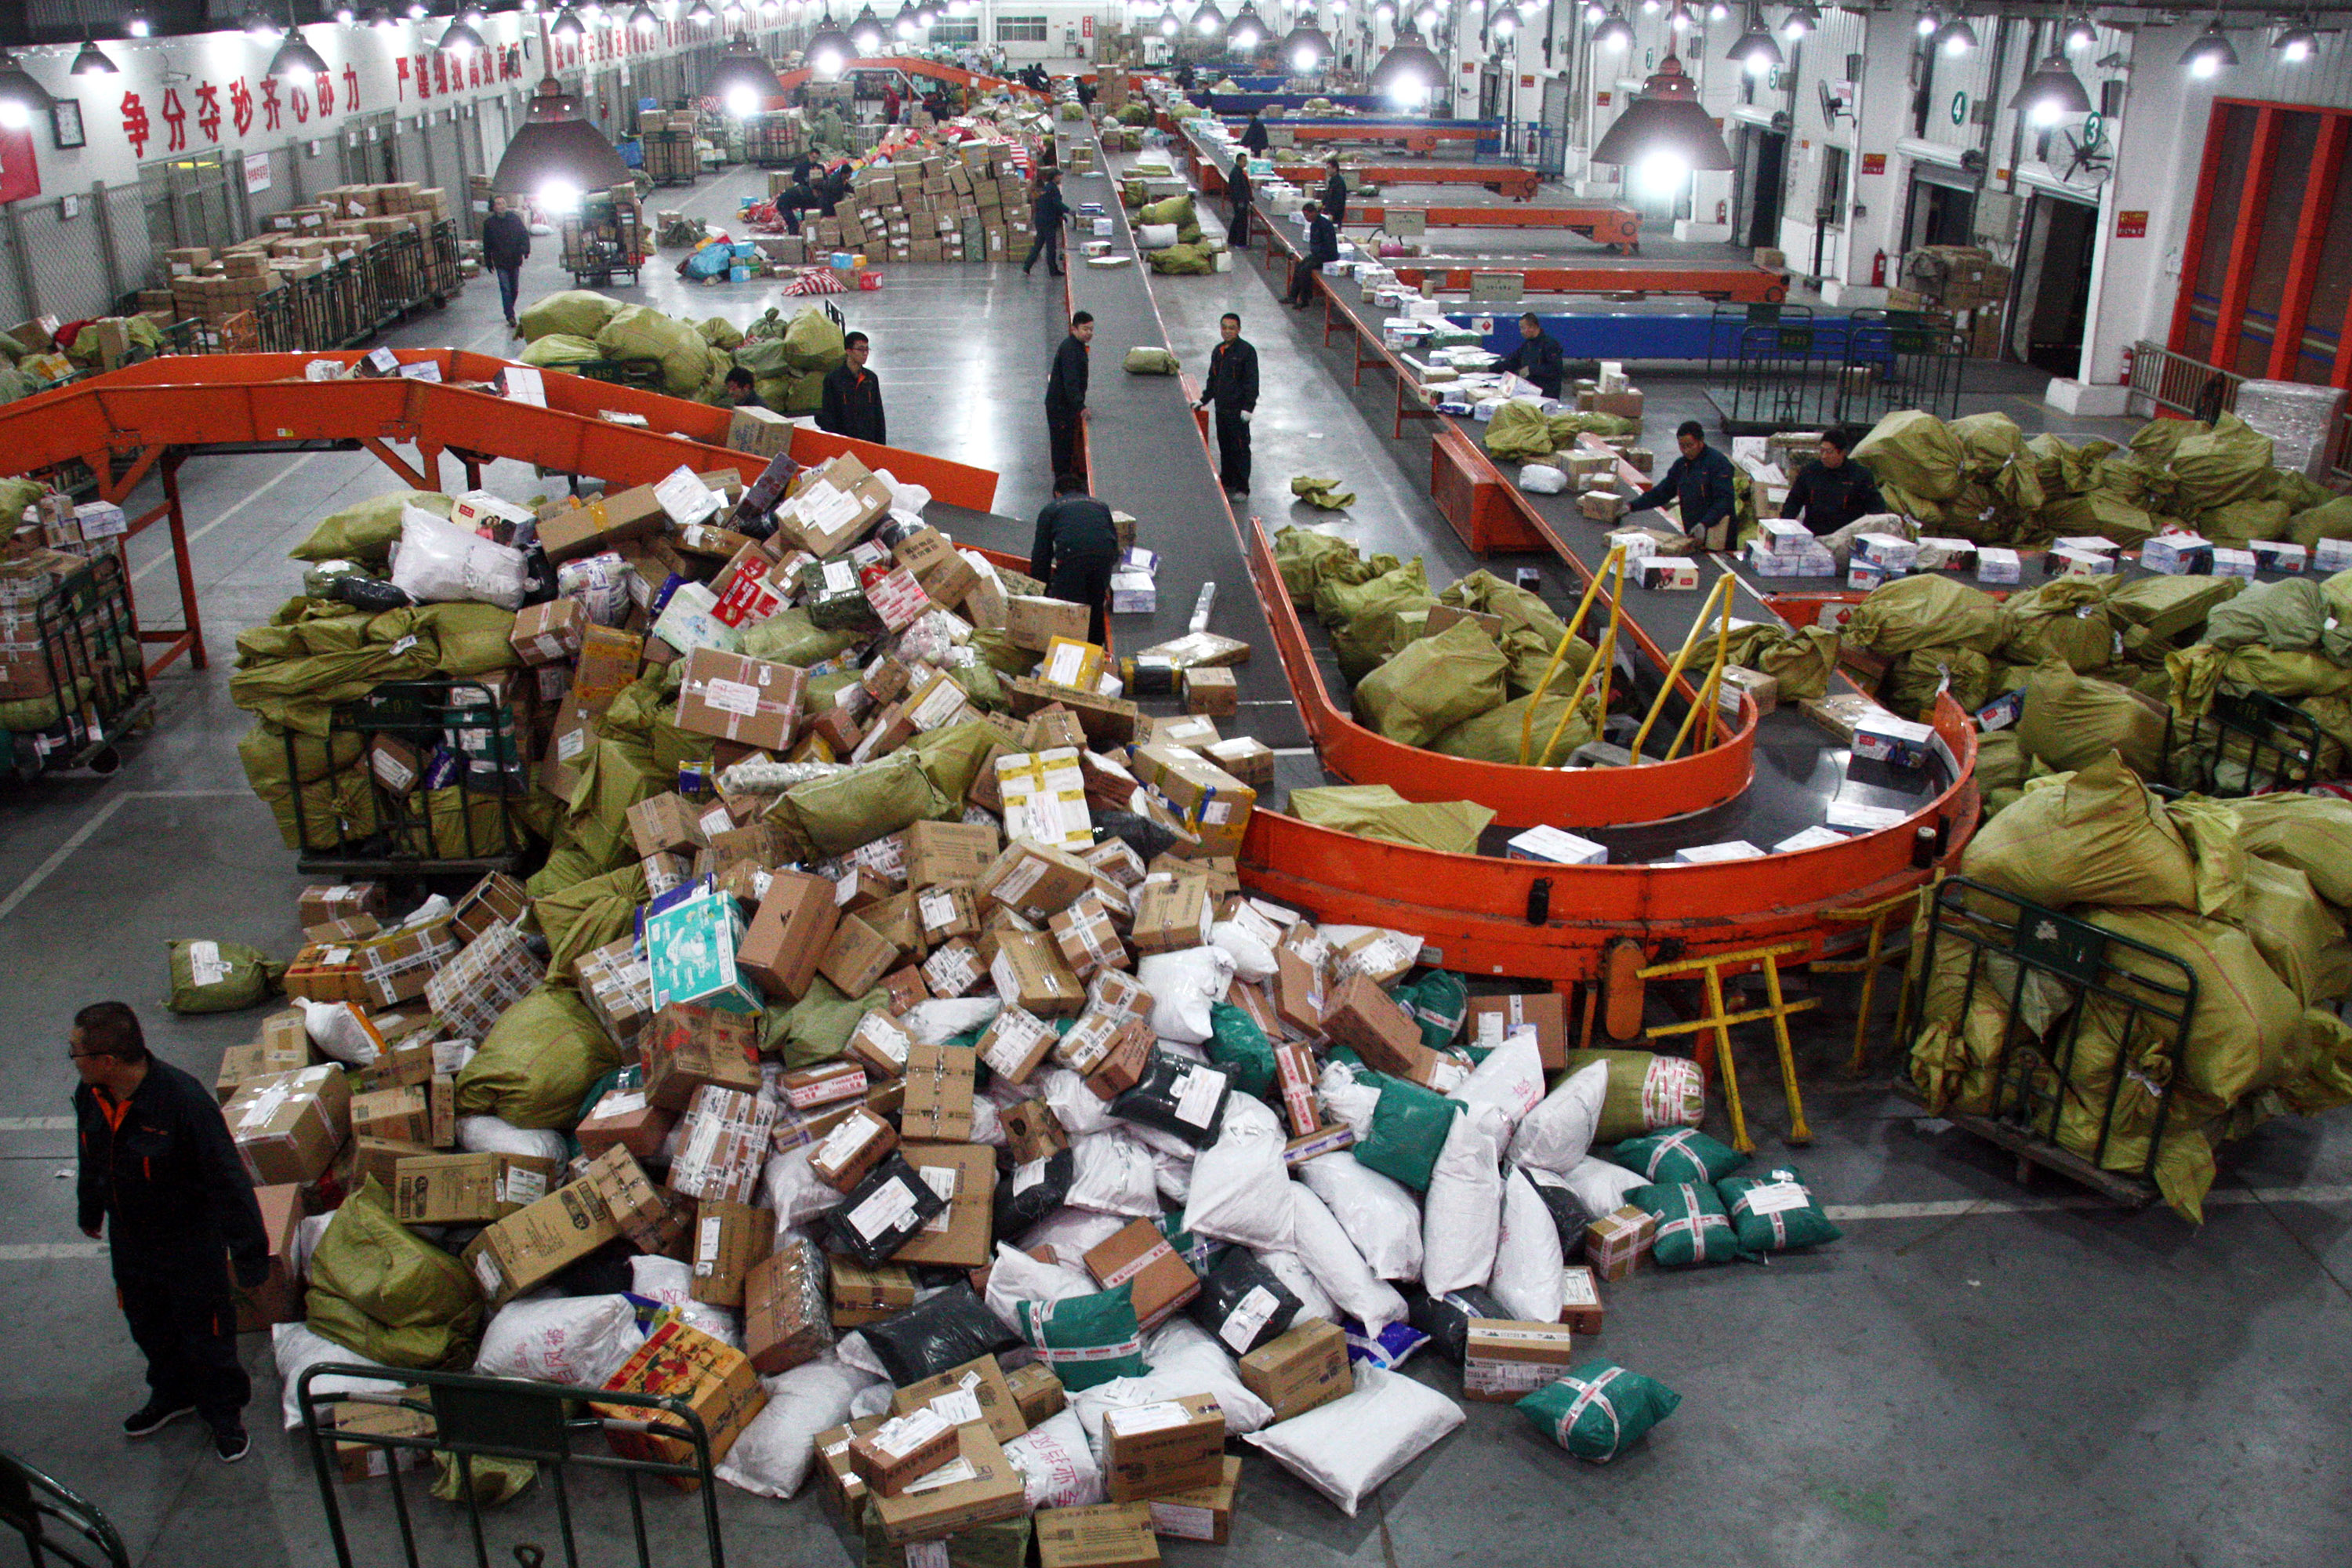 (150107) -- WEIFANG, Jan. 7, 2015 (Xinhua) -- File photo taken on Nov. 13, 2014 shows couriers sorting parcels at an express facility in Weifang, east China's Shandong Province. The total revenue of China's express delivery market hit 204 billion yuan (33 billion U.S. dollars) in 2014, up 42 percent, official data showed on Tuesday. Businesses made 14 billion deliveries last year, the most in the world and 52 percent up from 2013, according to the State Post Bureau (SPB). (Xinhua/Guo Zhihua) (wyo)